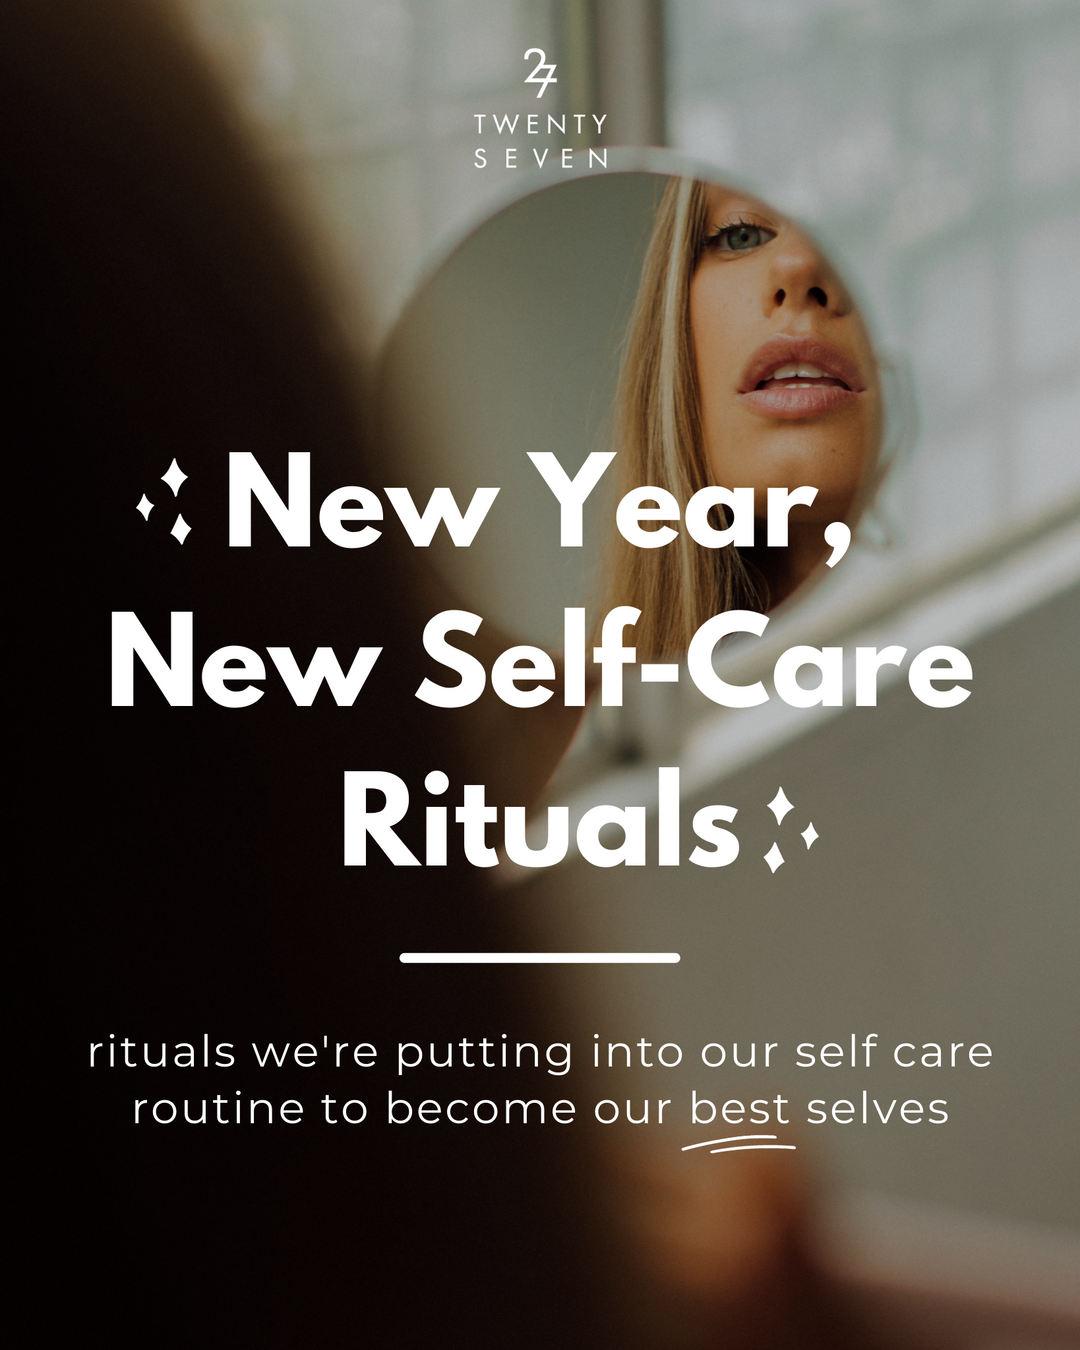 New Year, New Self-Care Rituals